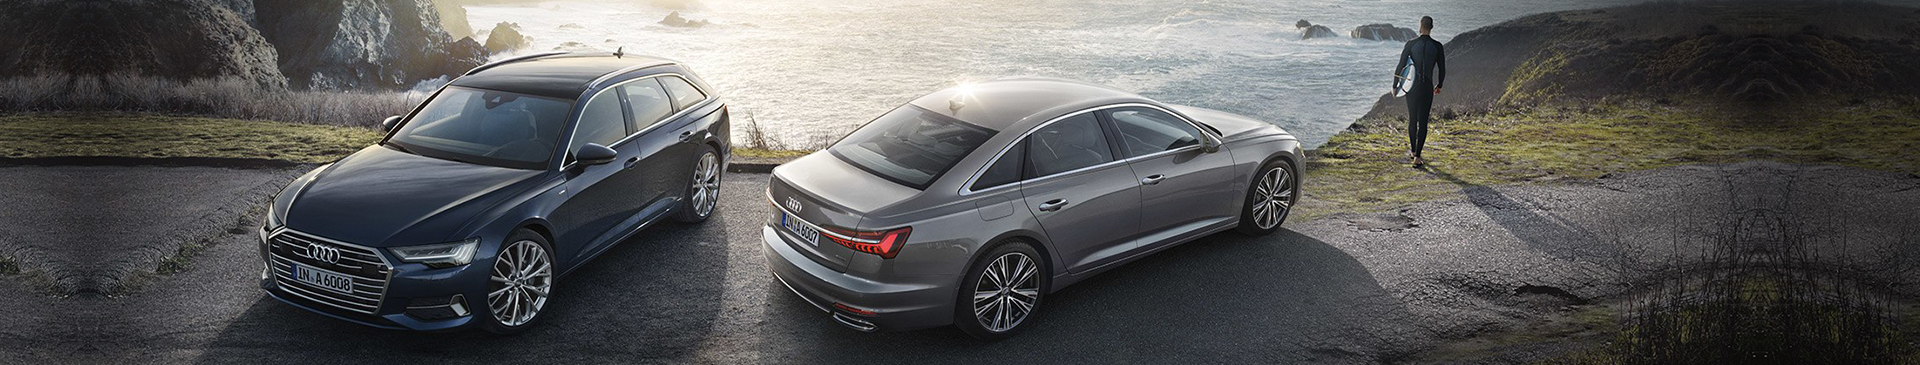 Nuova Audi A6 Avant: this is your time